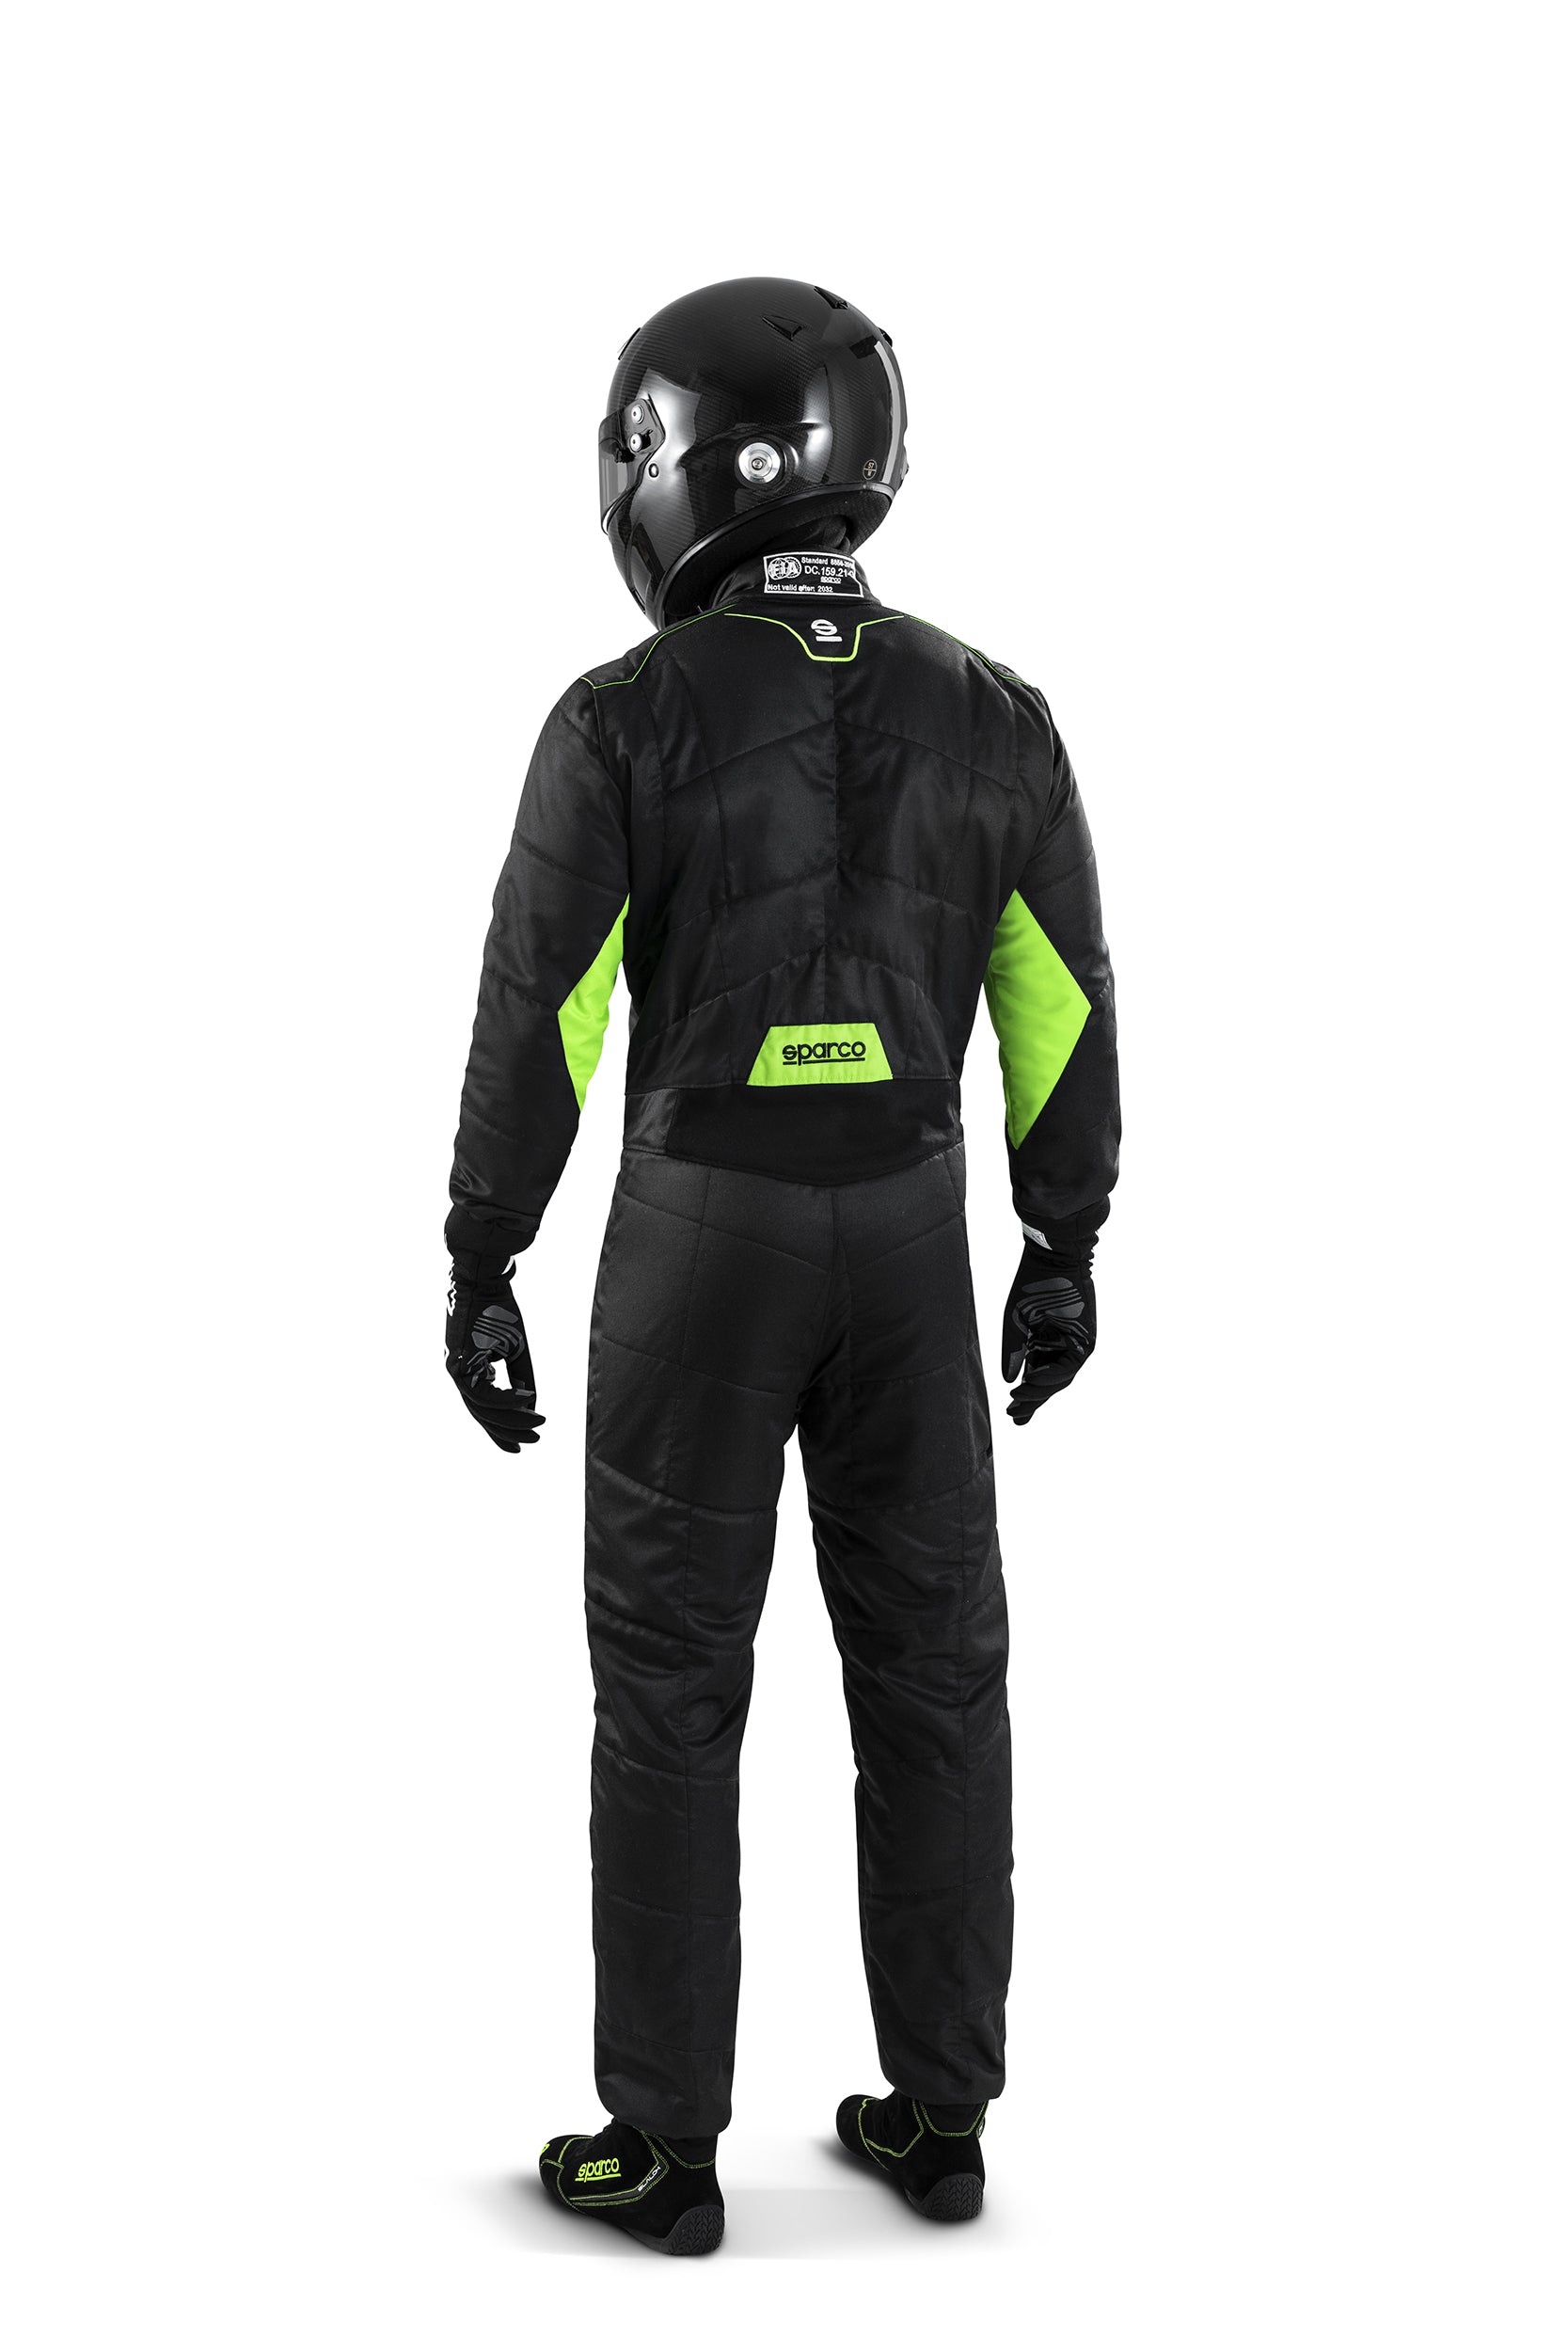 SPARCO 00109348NRVF SPRINT 2022 Racing suit, FIA 8856-2018, black/green, size 48 Photo-1 